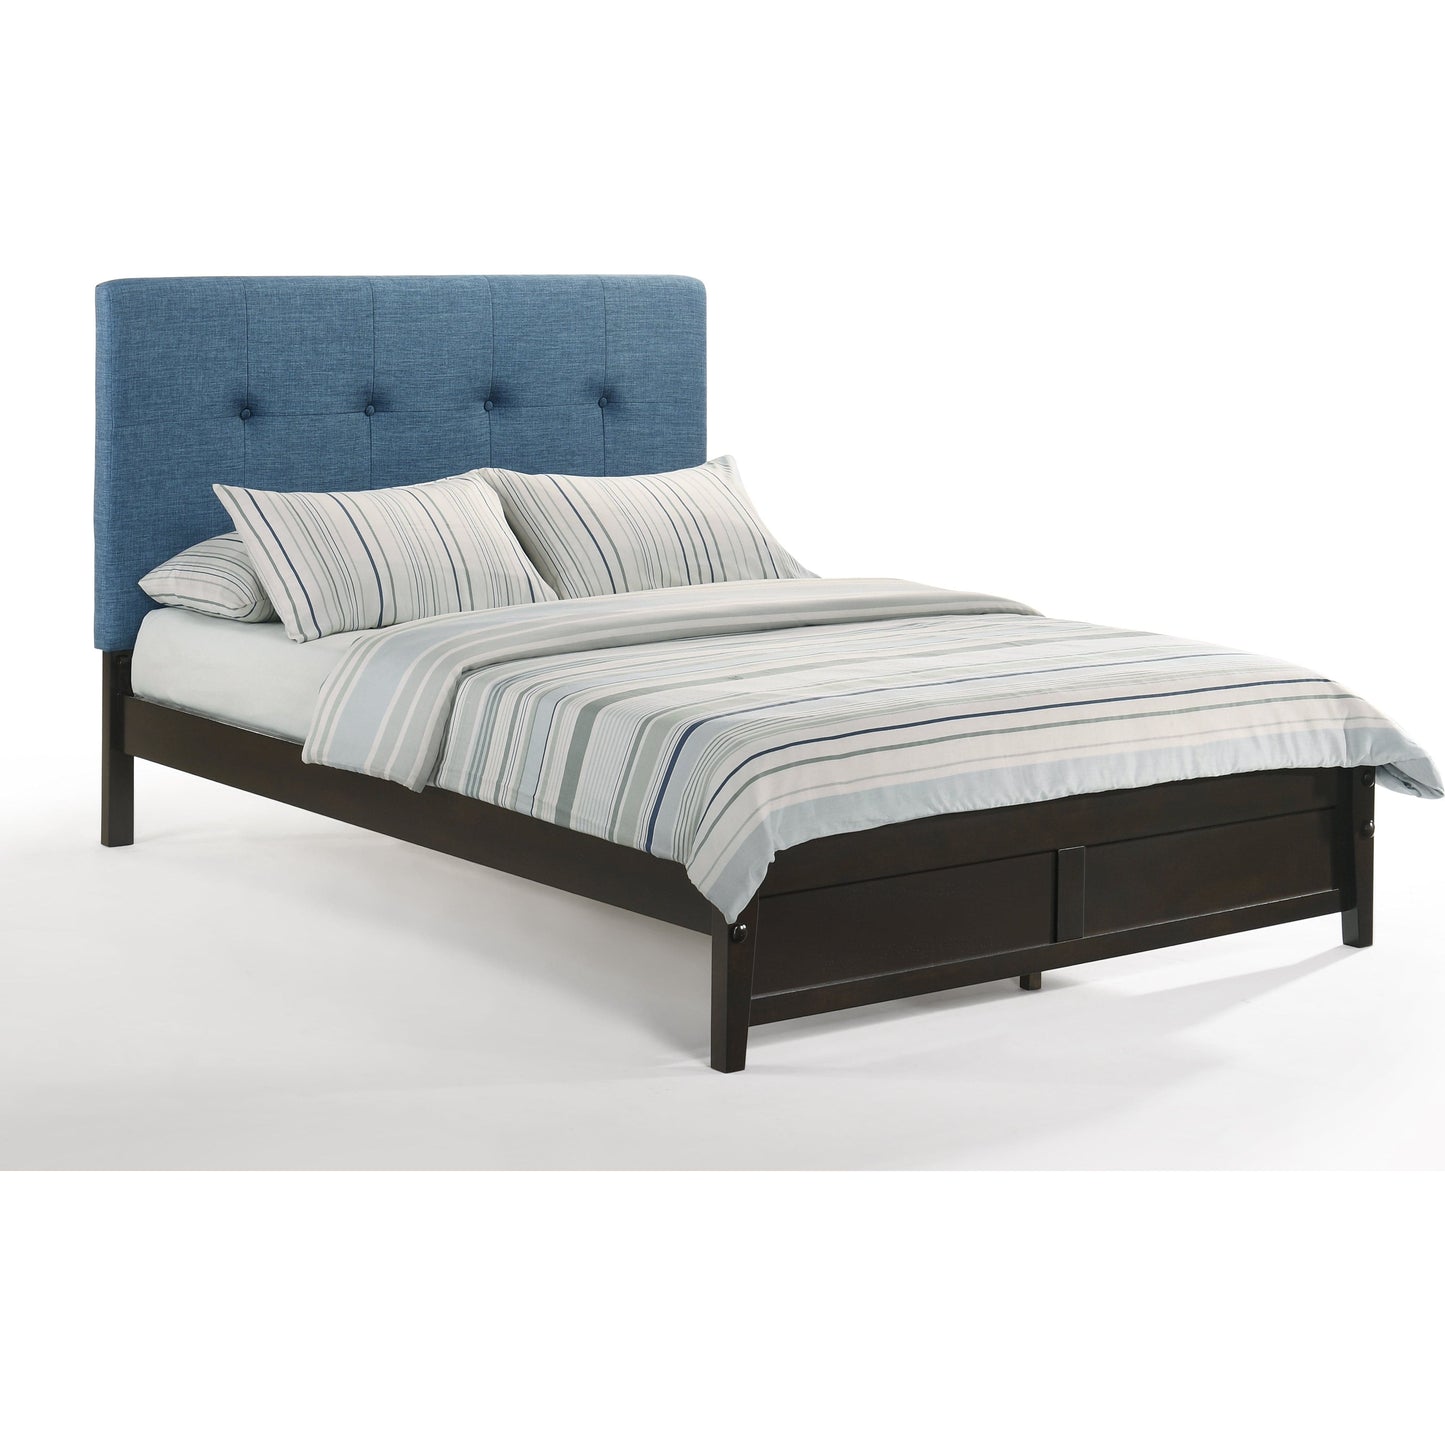 Night And Day Paprika California King Bed in Charcoal with Chocolate Finish Frame (P Series)